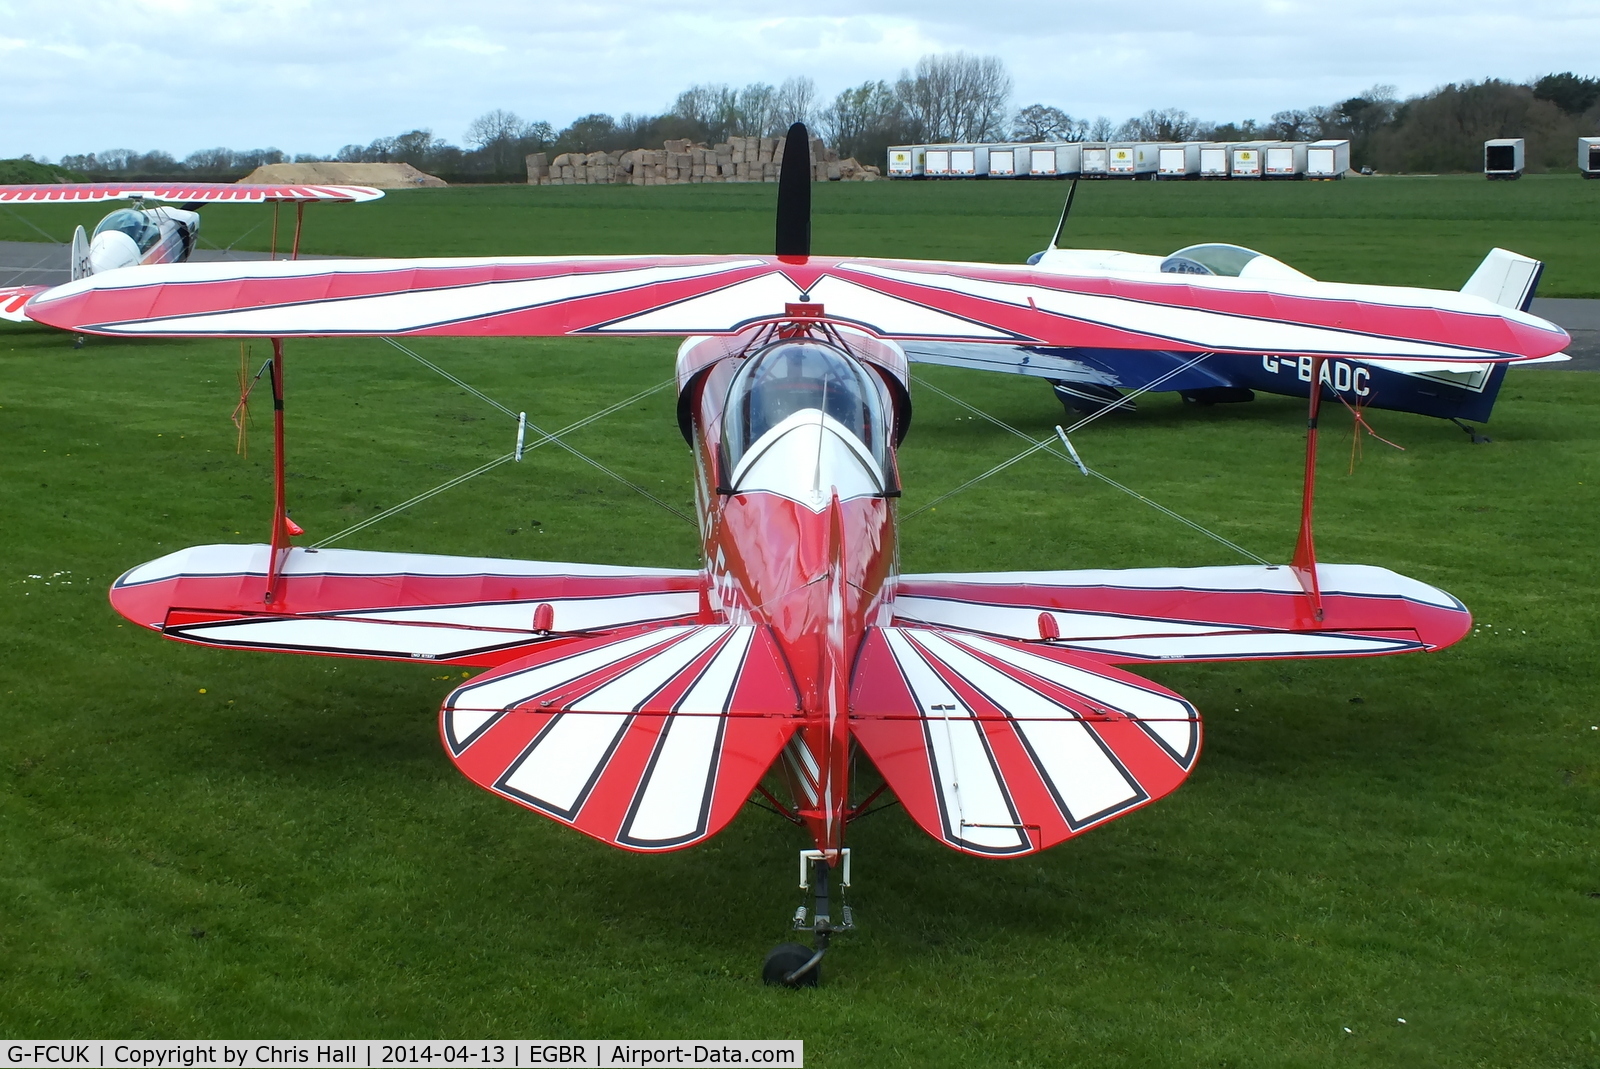 G-FCUK, 1974 Pitts S-1C Special C/N 02 (G-FCUK), at Breighton's 'Early Bird' Fly-in 13/04/14